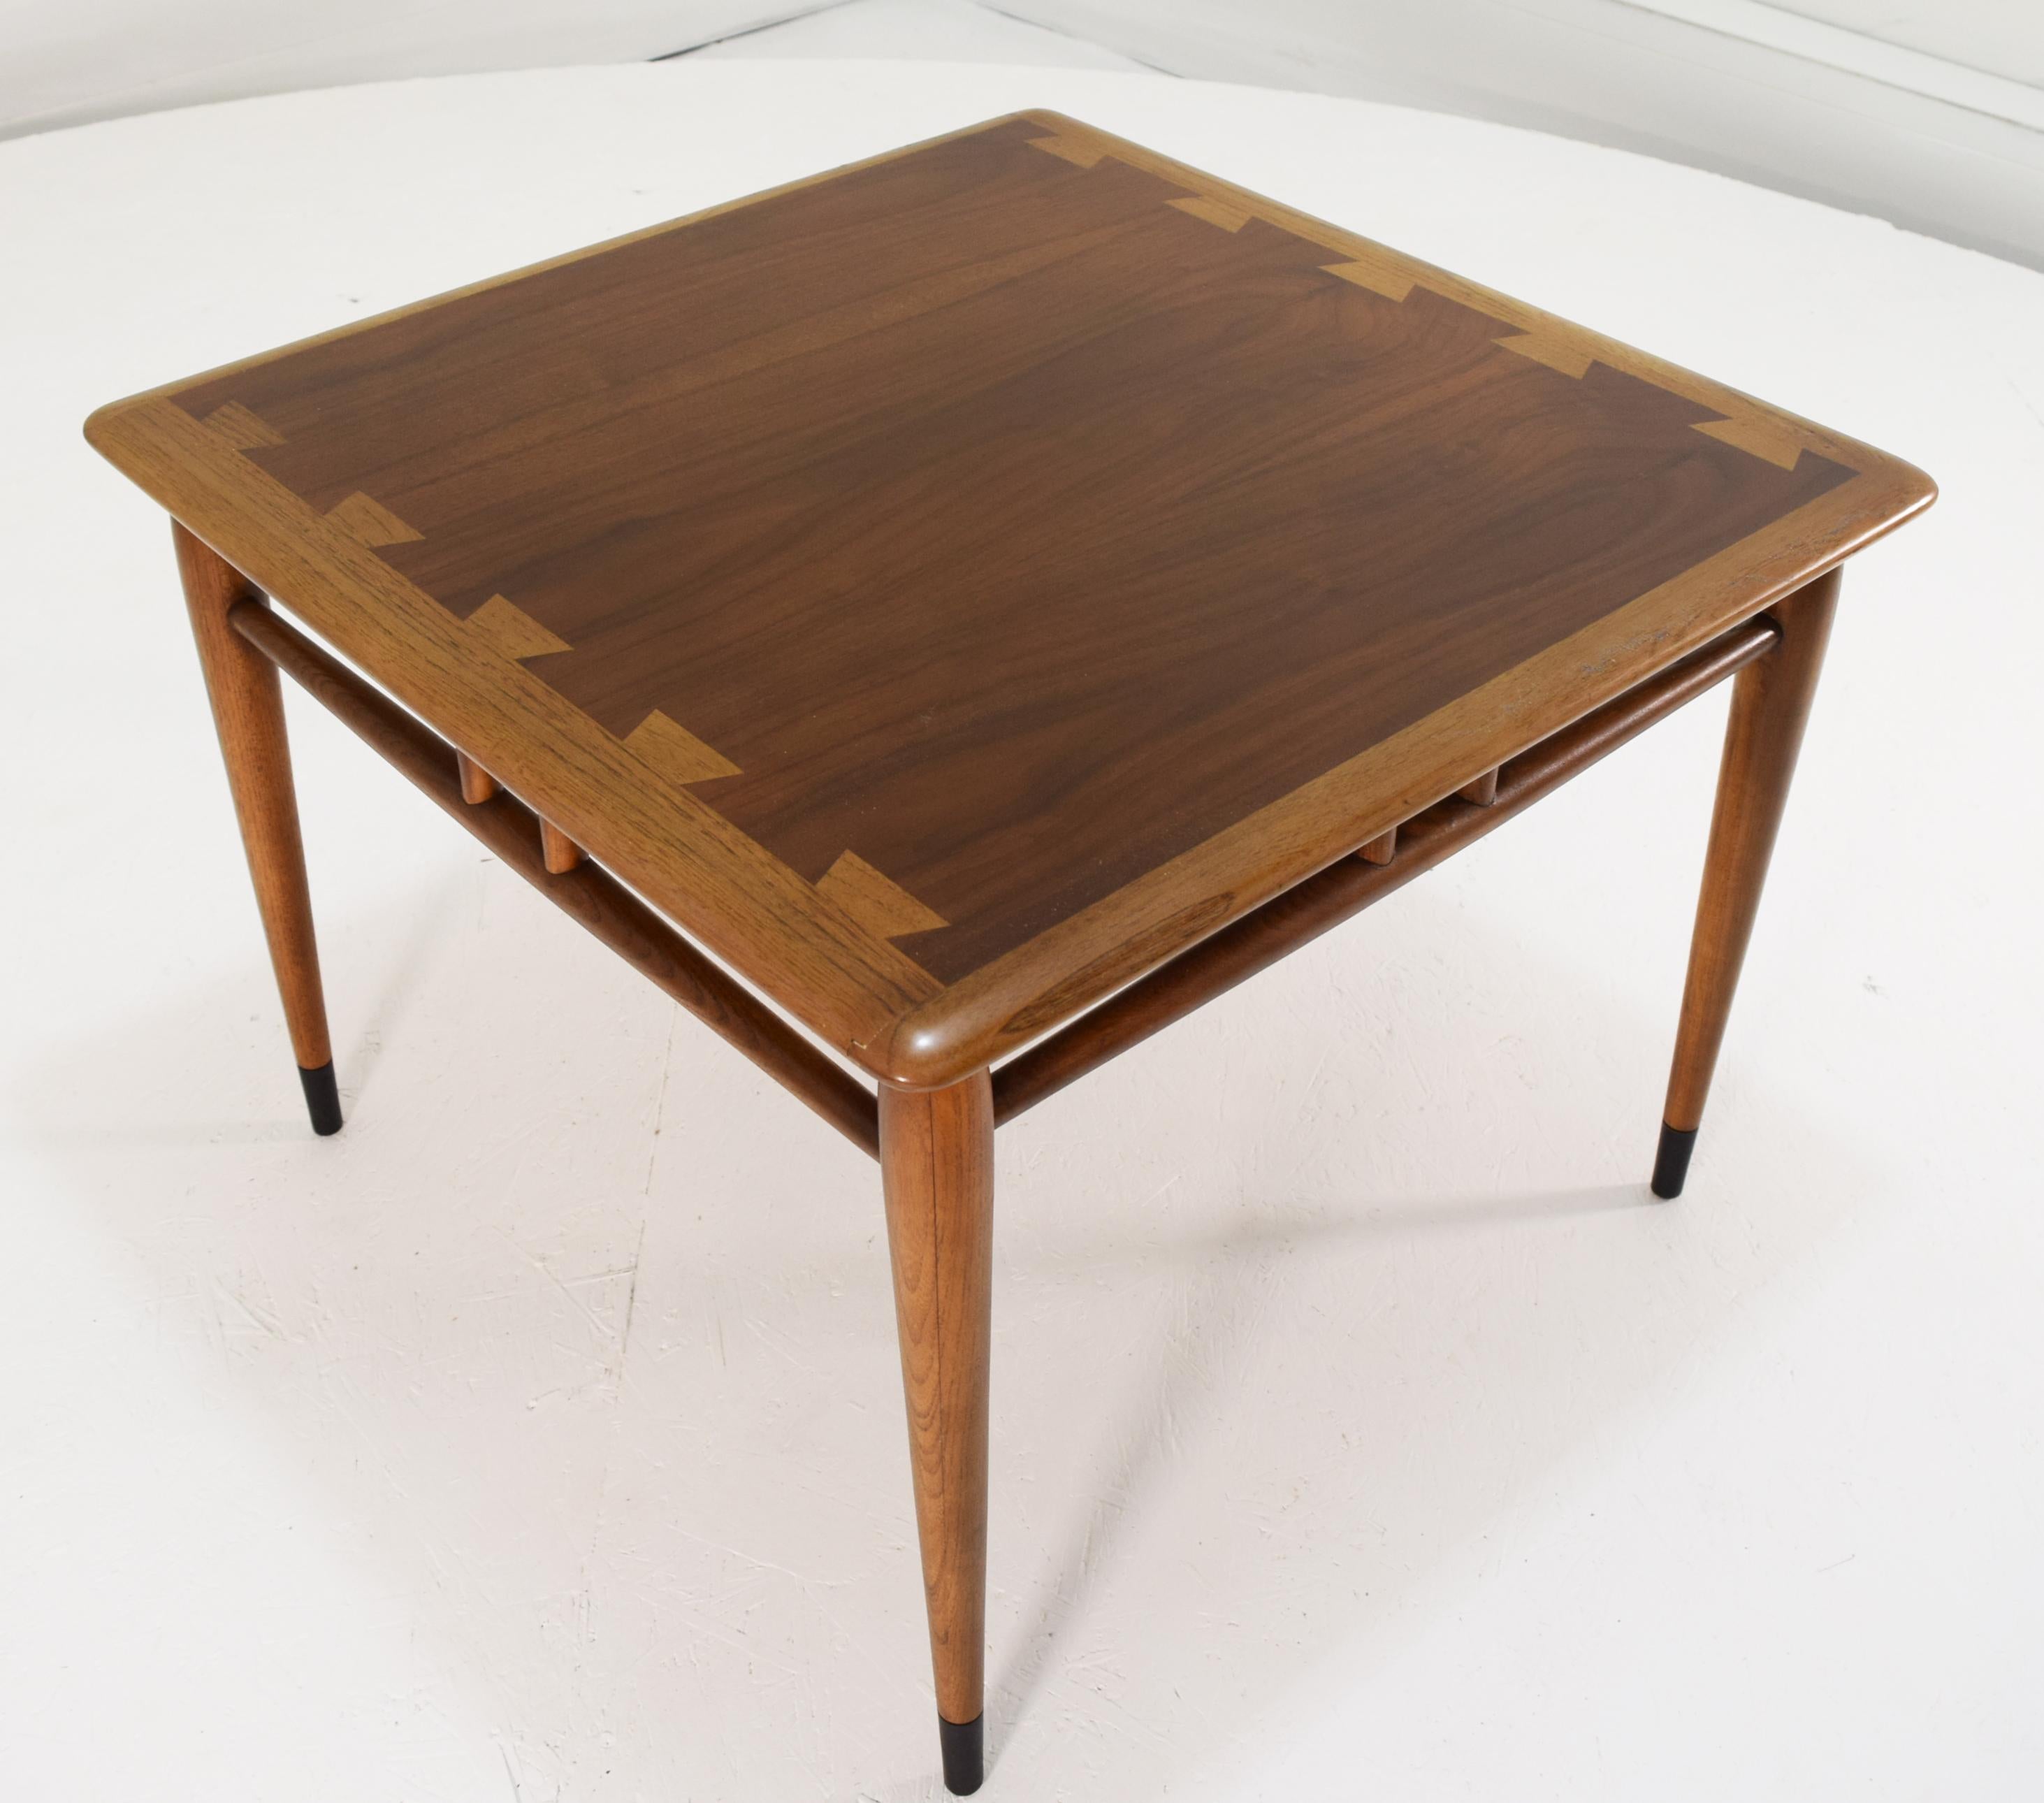 Acclaim, Lane Alta-Vista, circa 1970, 27 x 27 x 20 inches tall.
A large square table with walnut finished solid block banding, ebony finish to feet and walnut top. Stands taller than most from the series and is ideal for use as an end or display